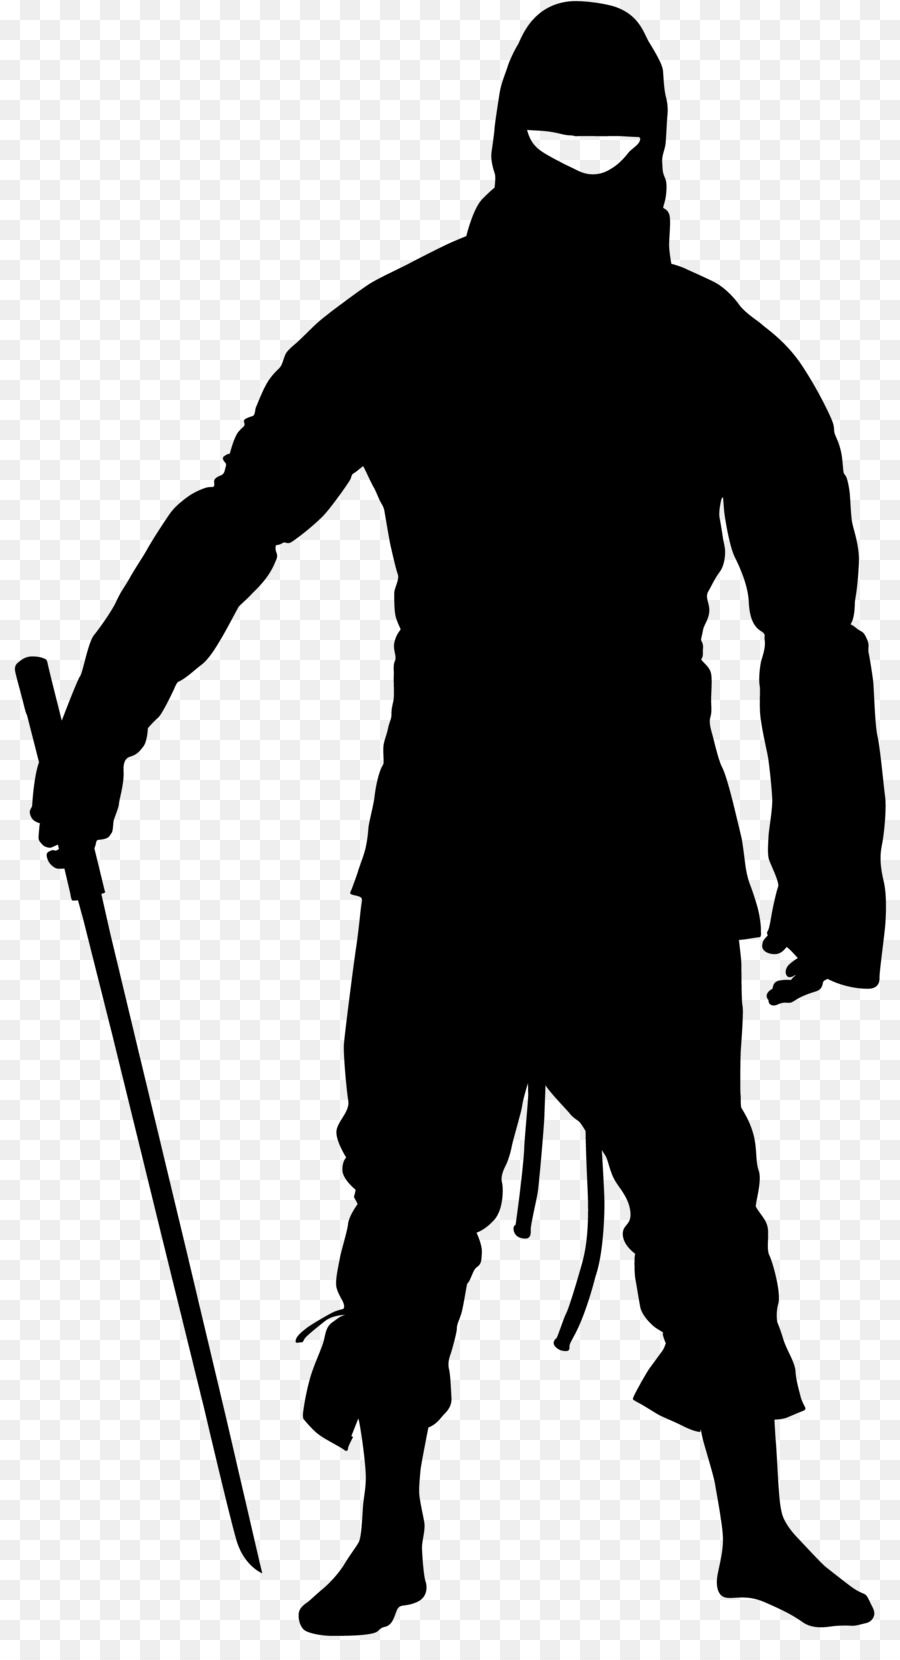 Silhouette Ninja Clip art - martial illustration png download - 2098*3840 - Free Transparent Silhouette png Download.